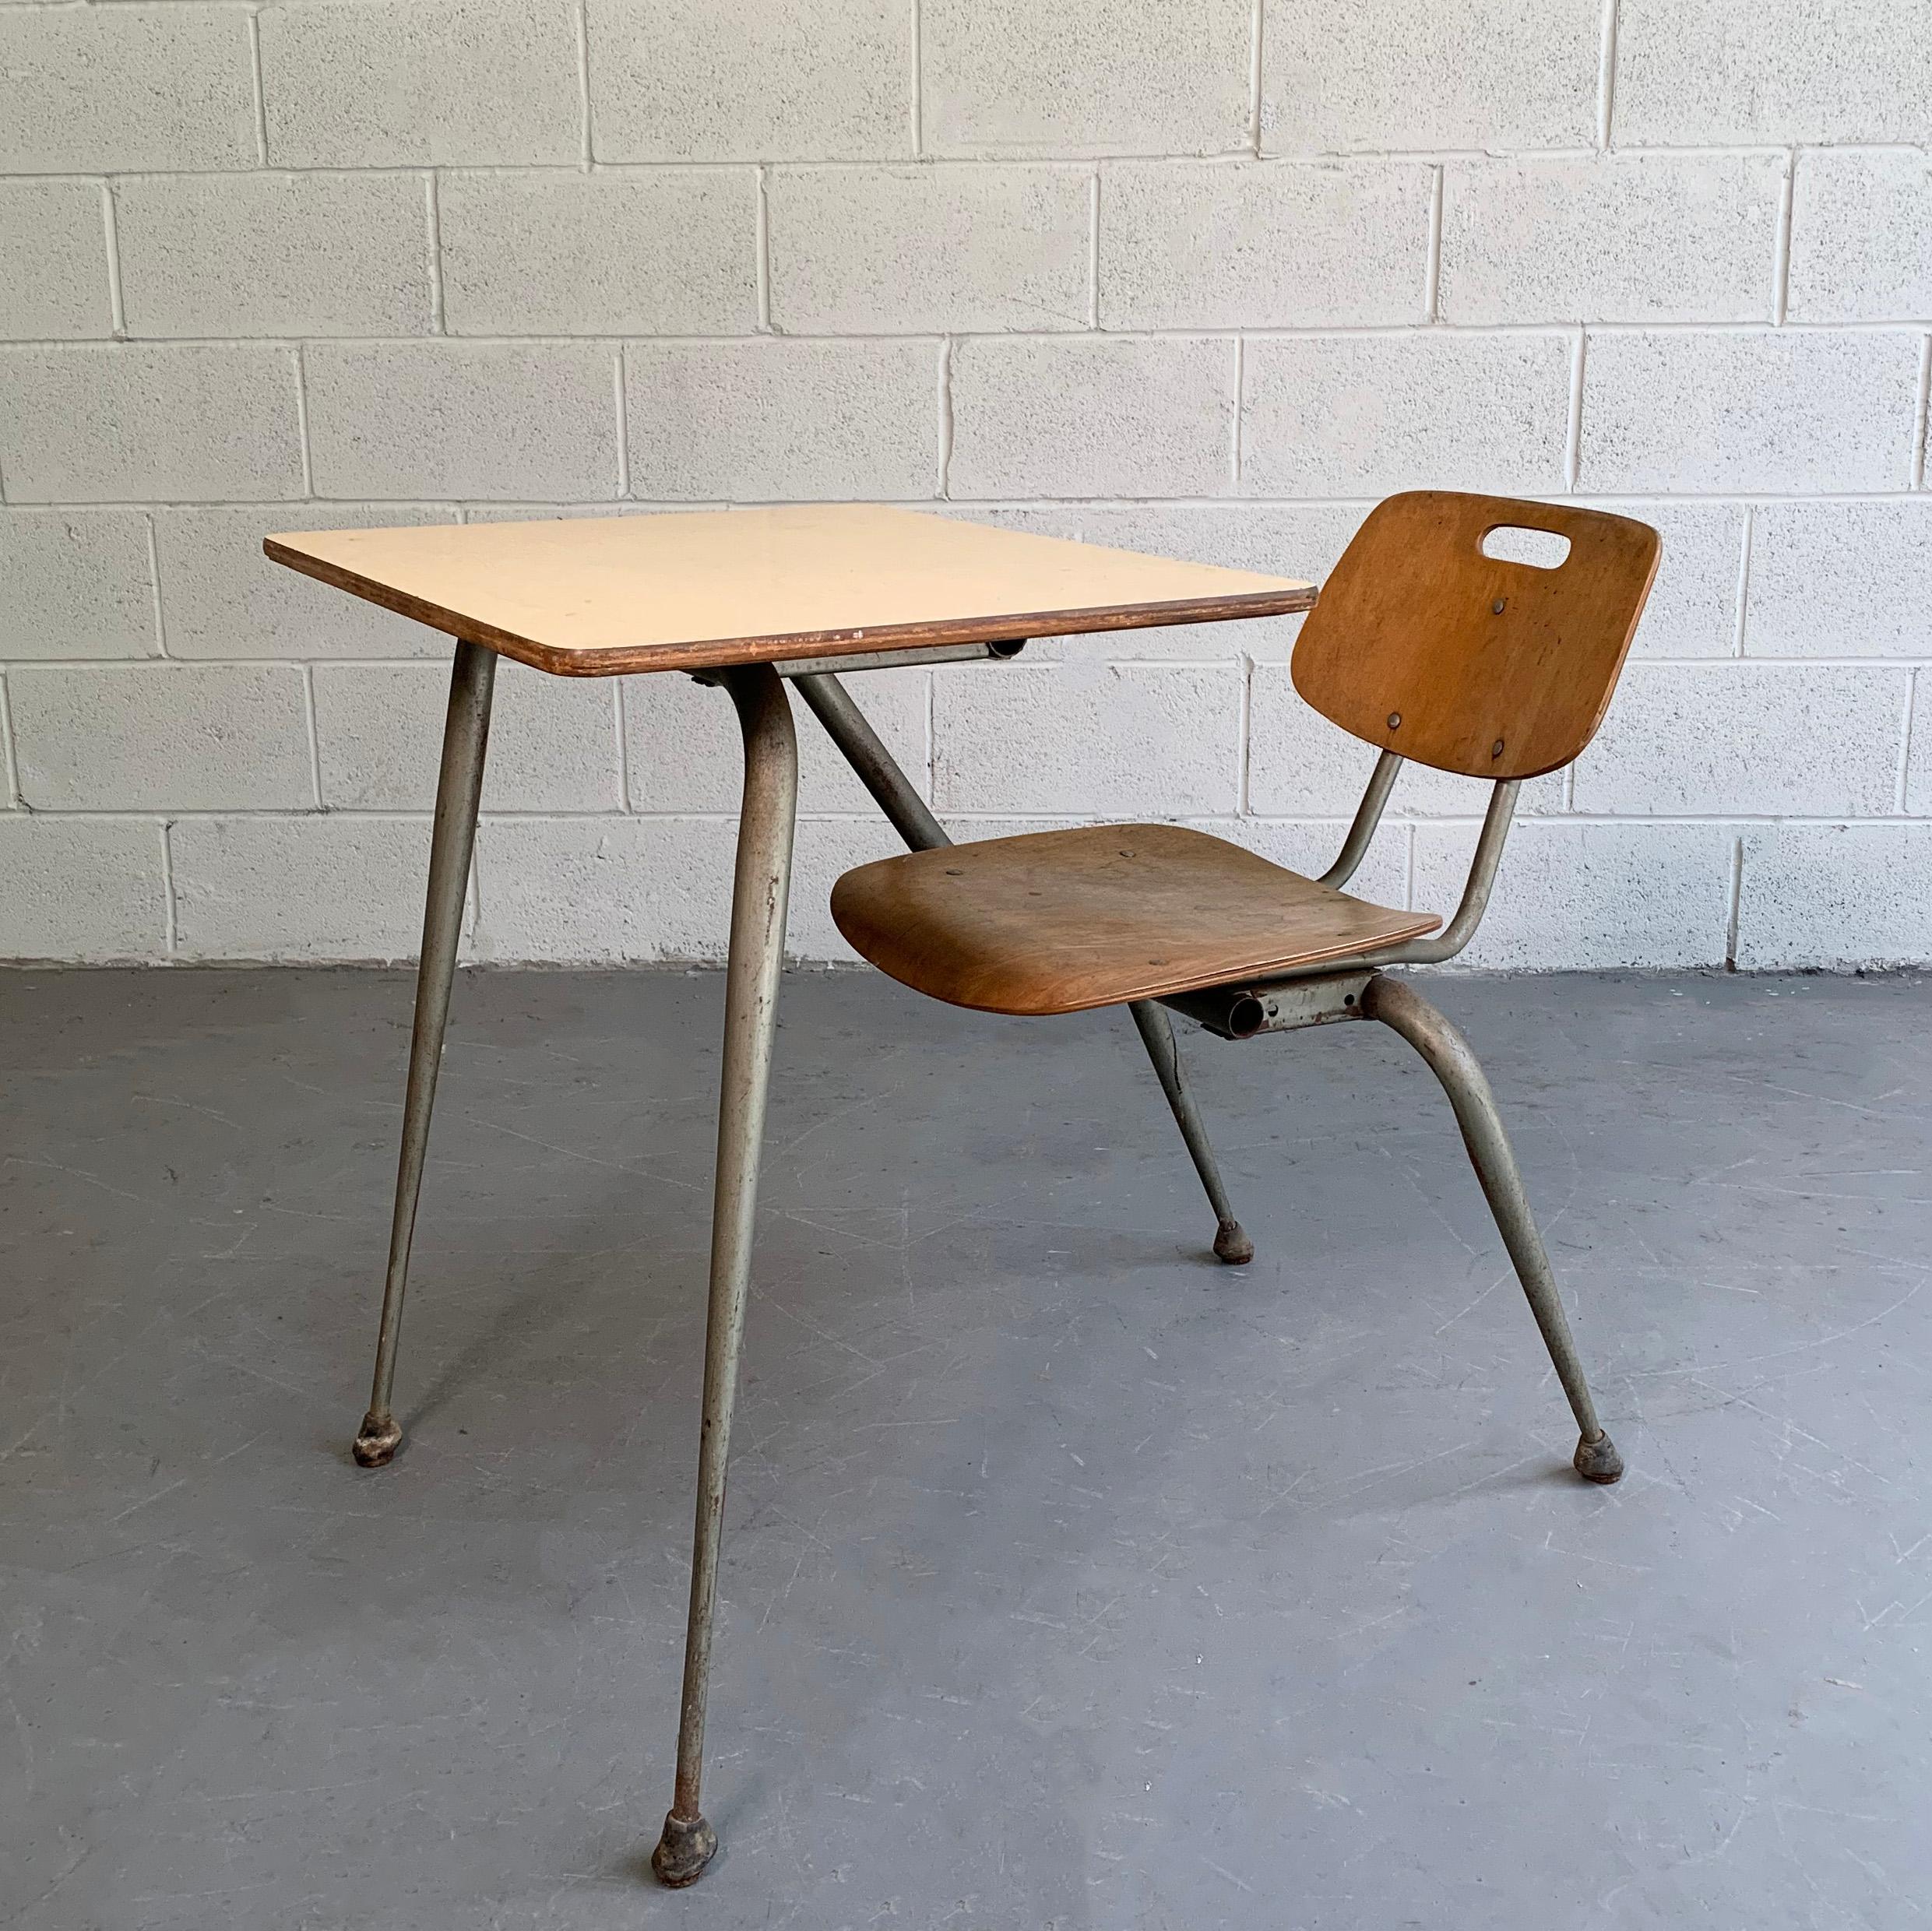 Midcentury, Machine Age, desk and chair ensemble by Raymond Loewy for Brunswick features a tapered, tubular steel frame with contoured maple ply chair with attached laminate desk top. The desk top measures 24 wide x 20 deep inches and the seat